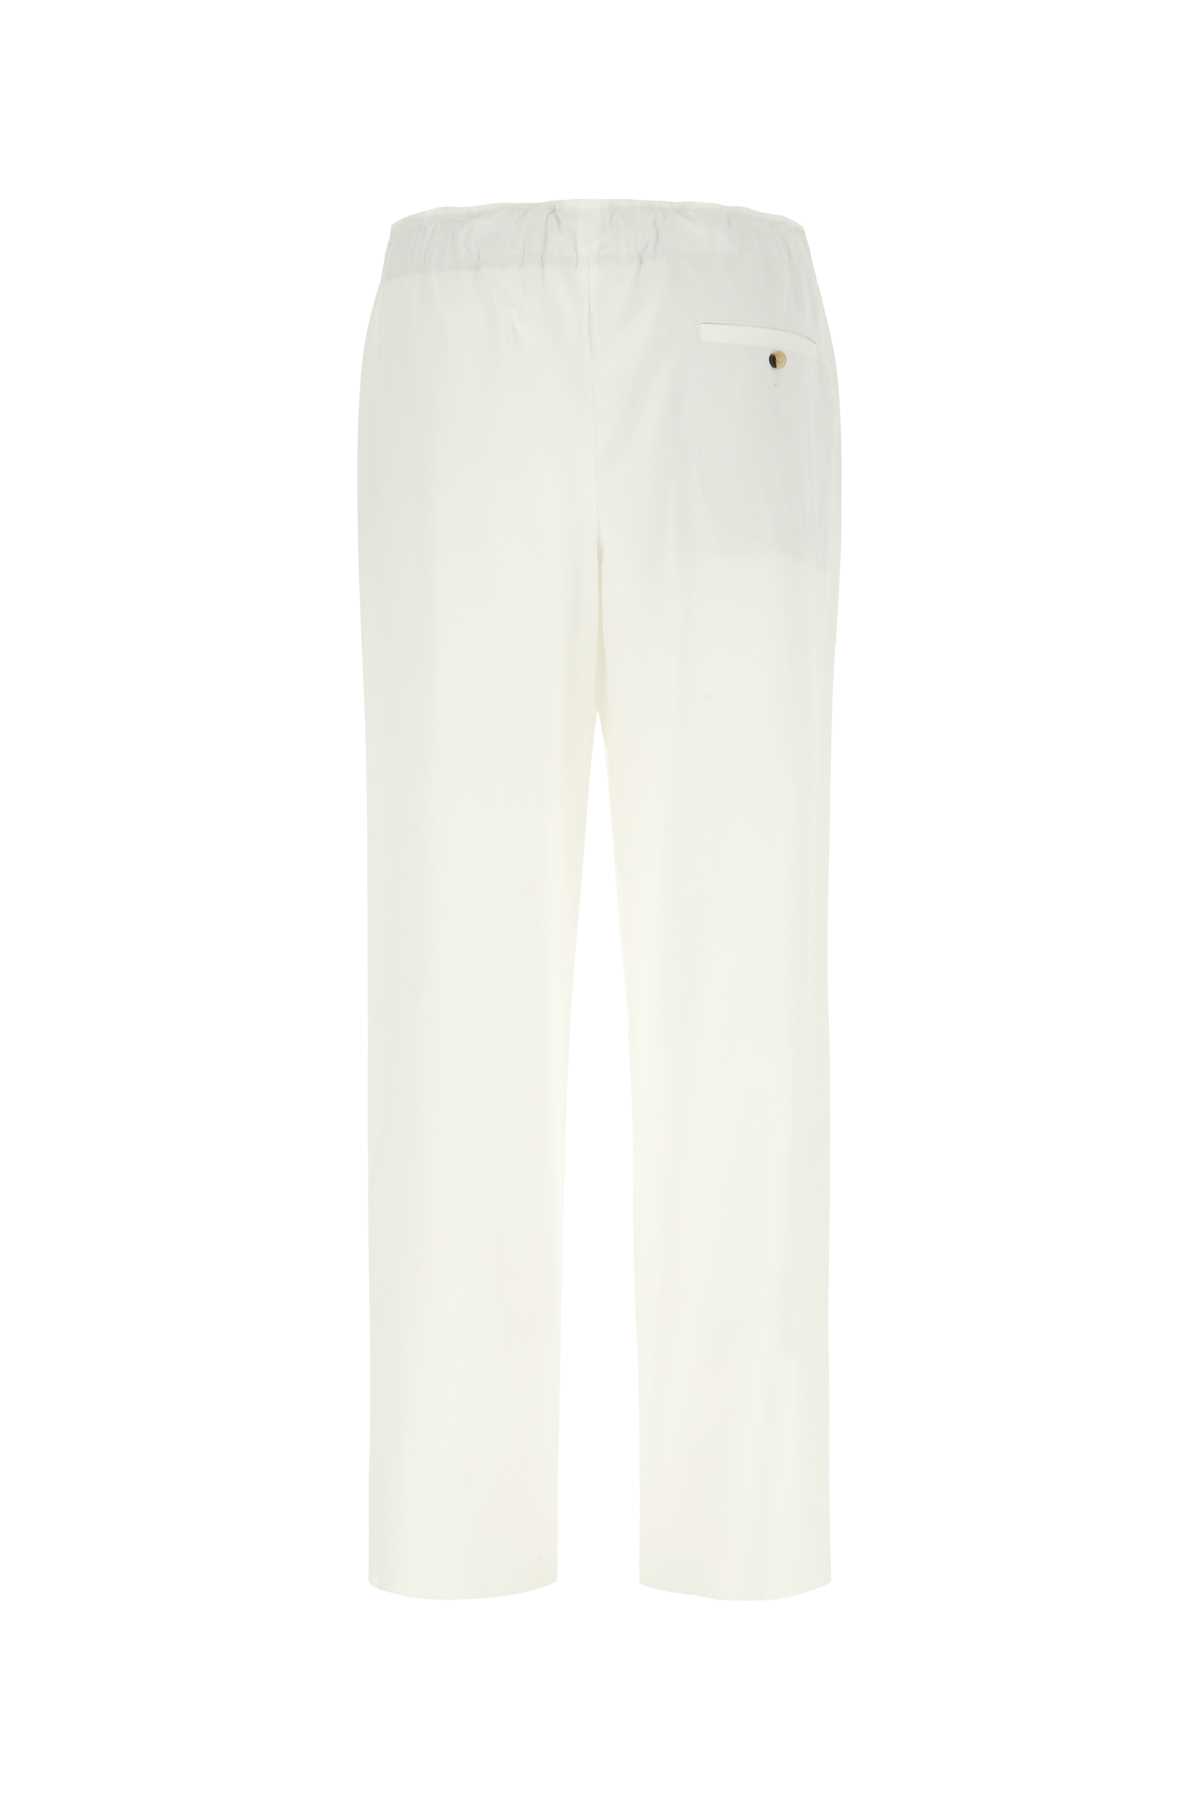 Agnona Ivory Cotton Blend Palazzo Pant In N02